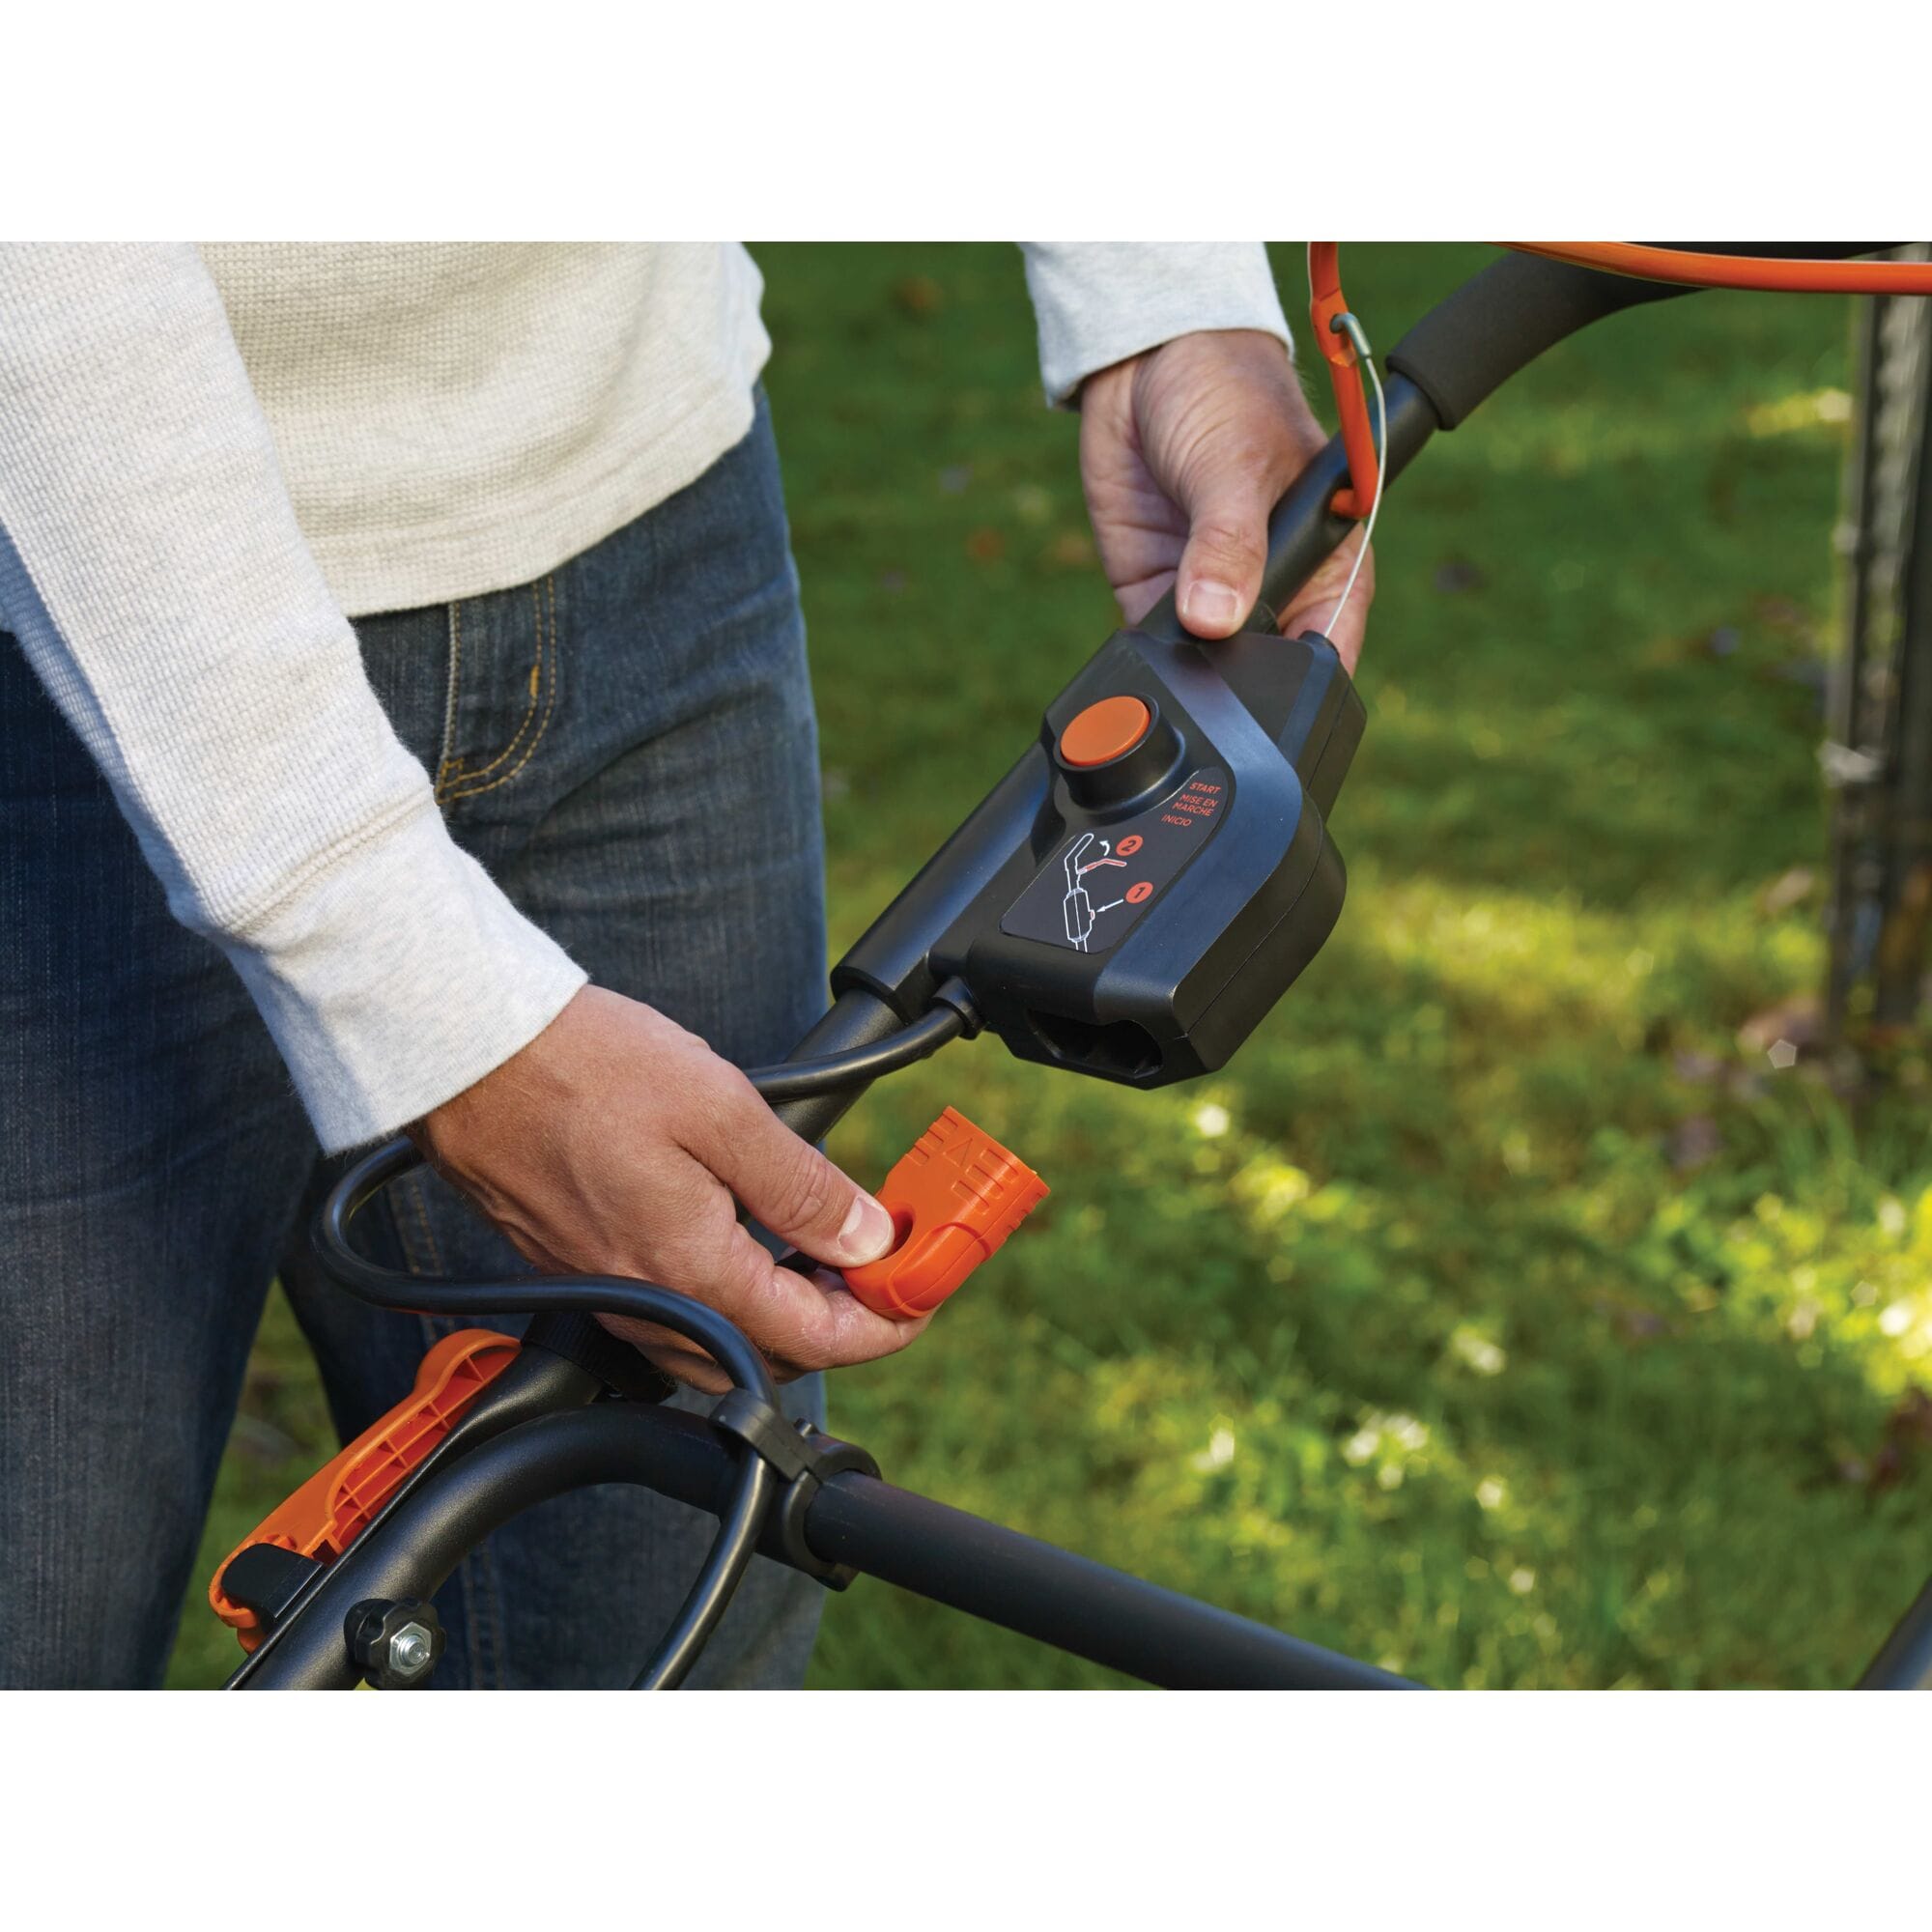 Black and Decker 40V MAX Lithium 20 In. Mower (CM2040) Review